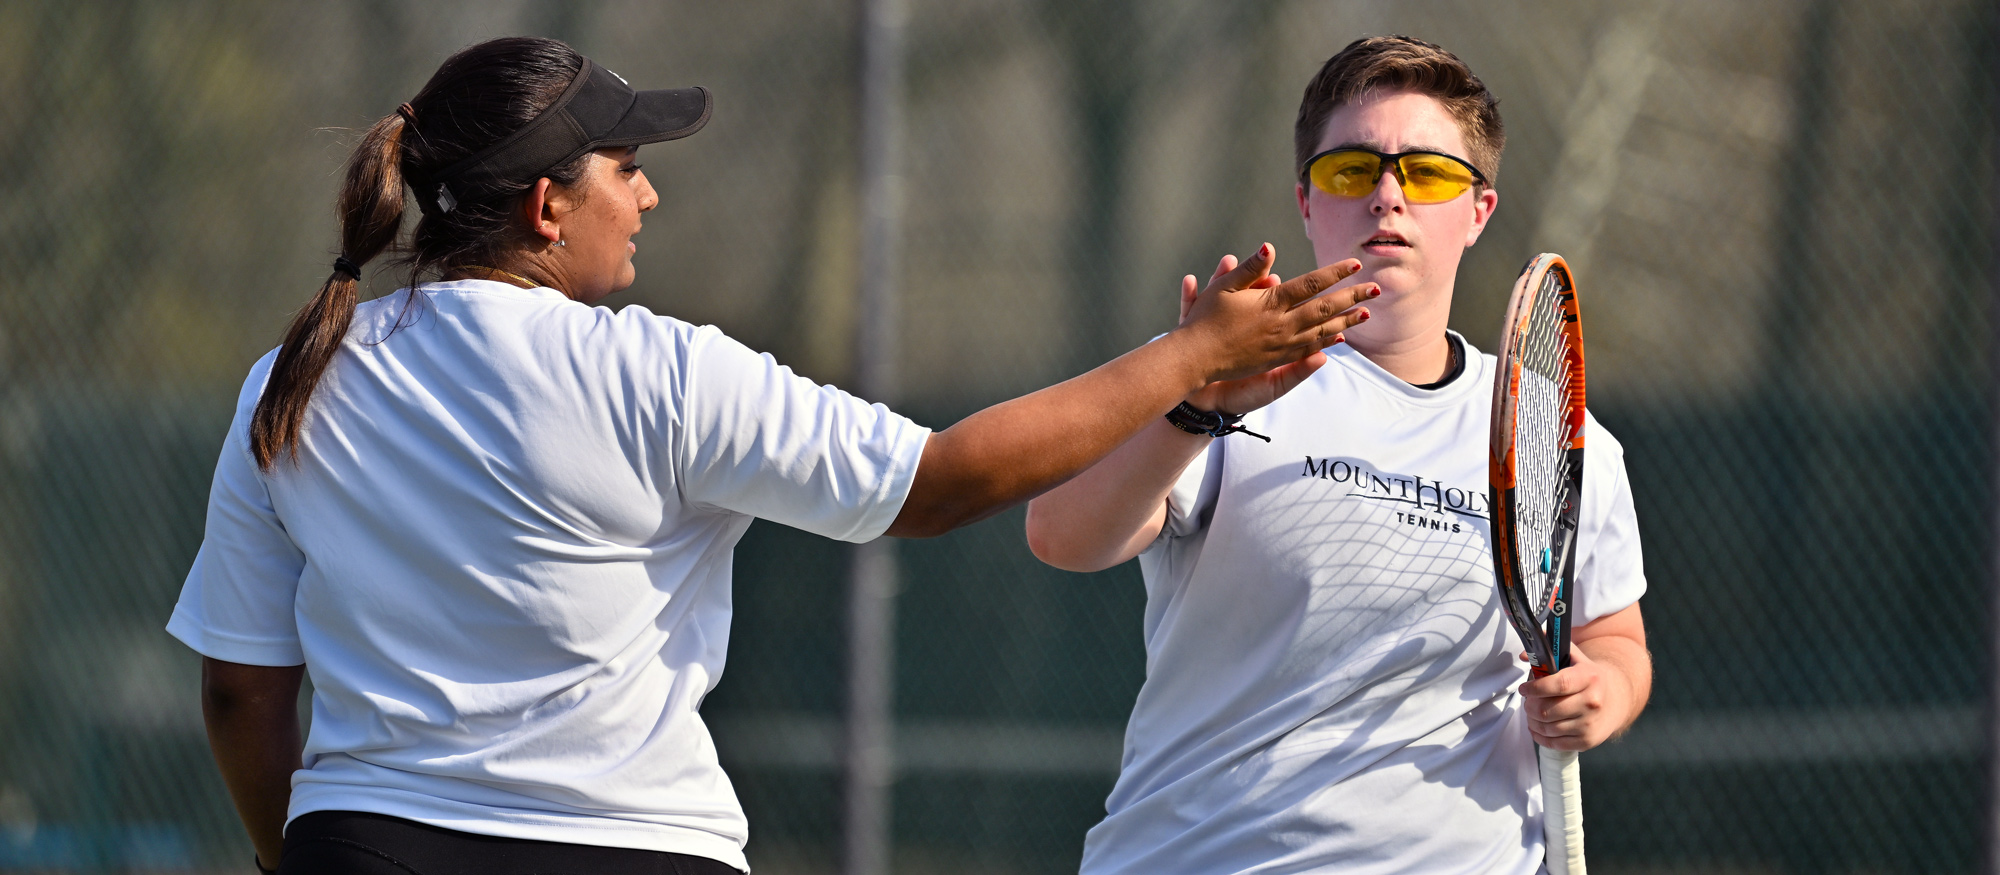 Shweta Kiran Cavale (left) and Cal Smith (right) both went 2-0 on the day, including an 8-2 combined win at No. 2 doubles, as Mount Holyoke defeated Emerson 9-0 on April 22, 2023. (RJB Sports file photo)